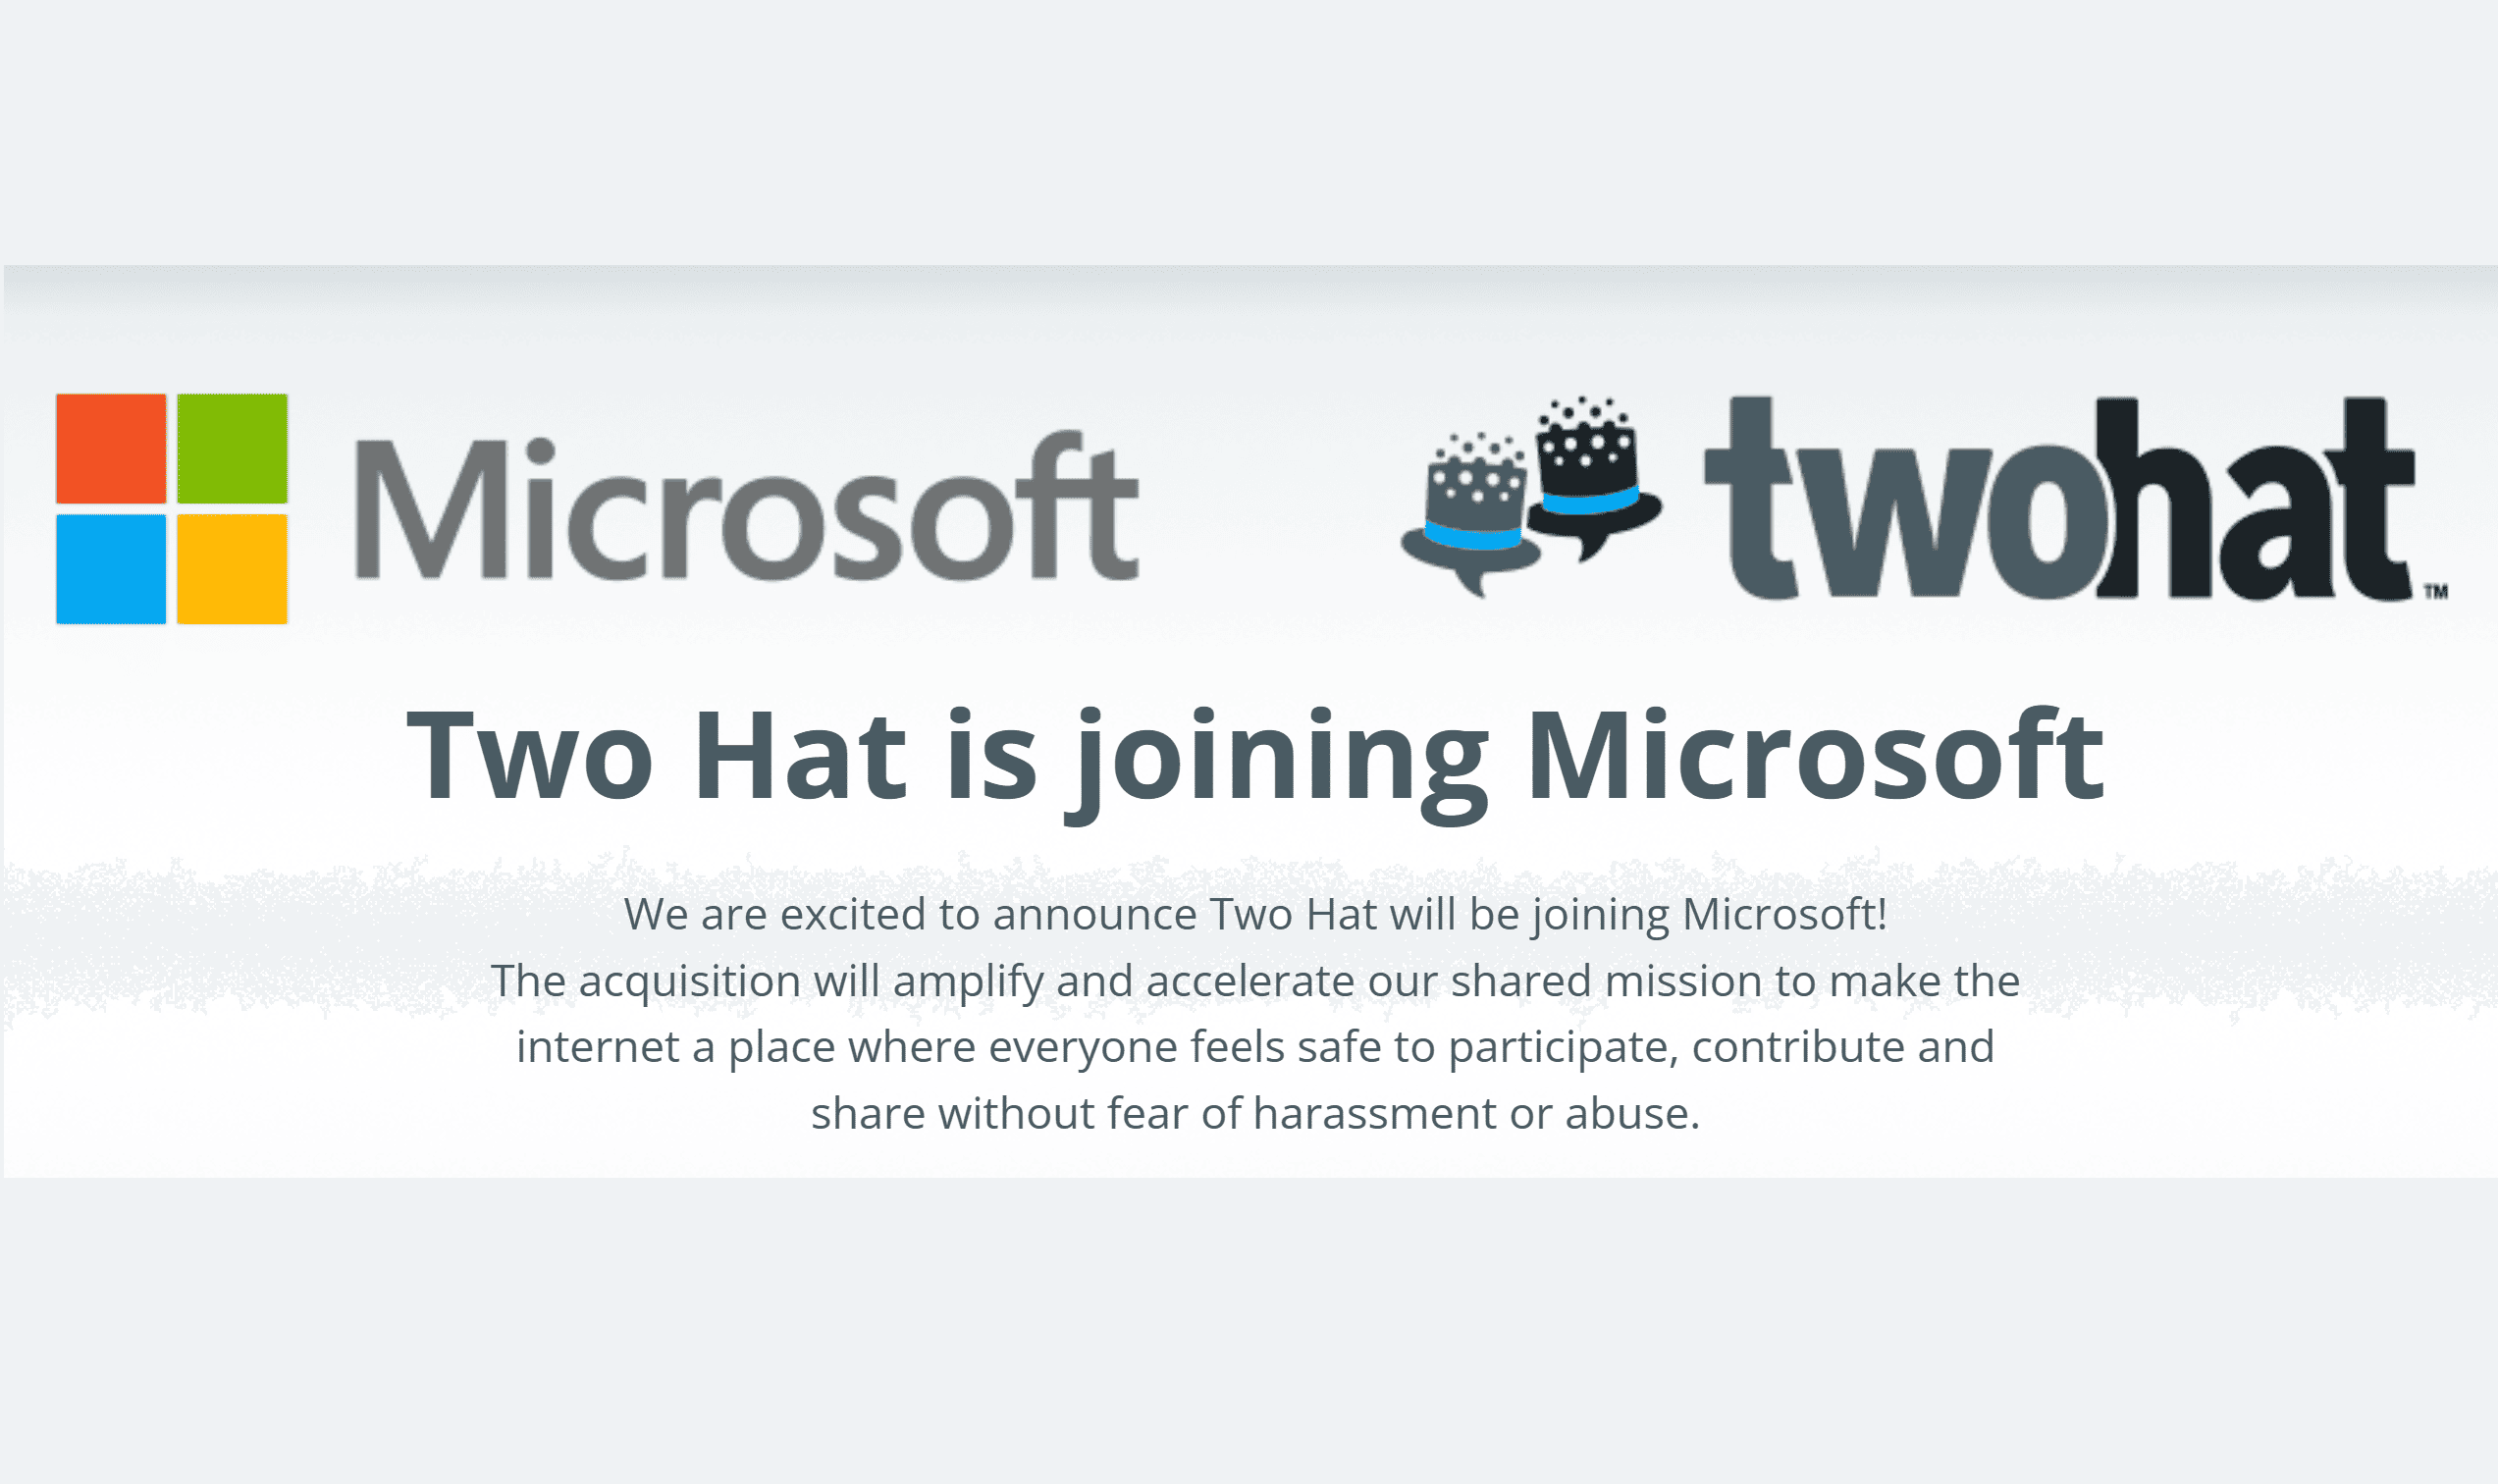 Microsoft acquires Two Hat, a leading content moderation solution provider